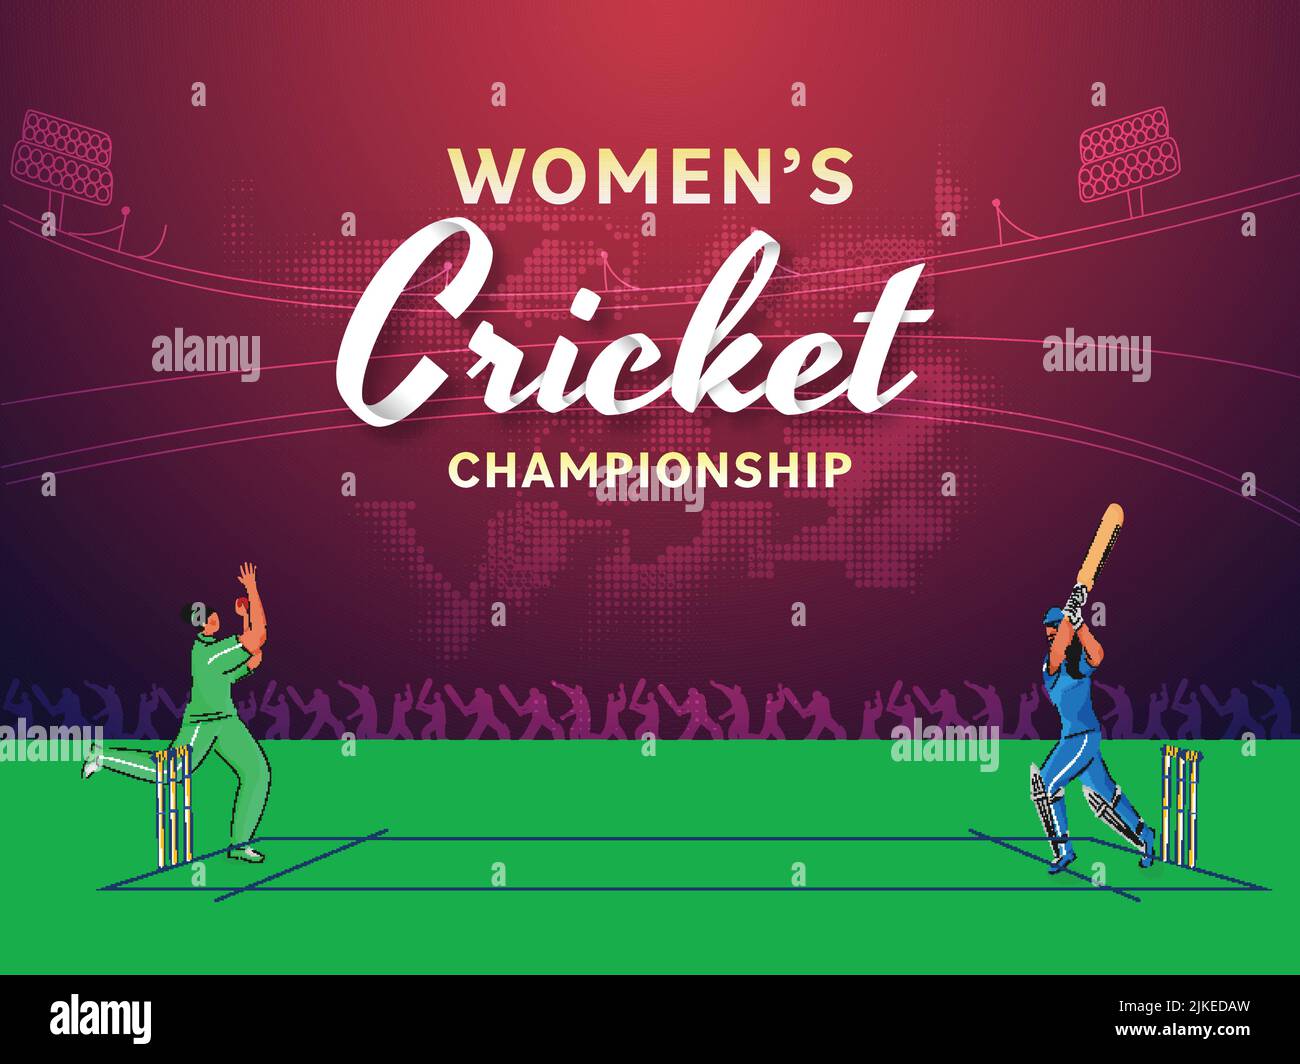 Women's Cricket Championship Concept With Participating Players Of India VS Pakistan On Stadium Background. Stock Vector